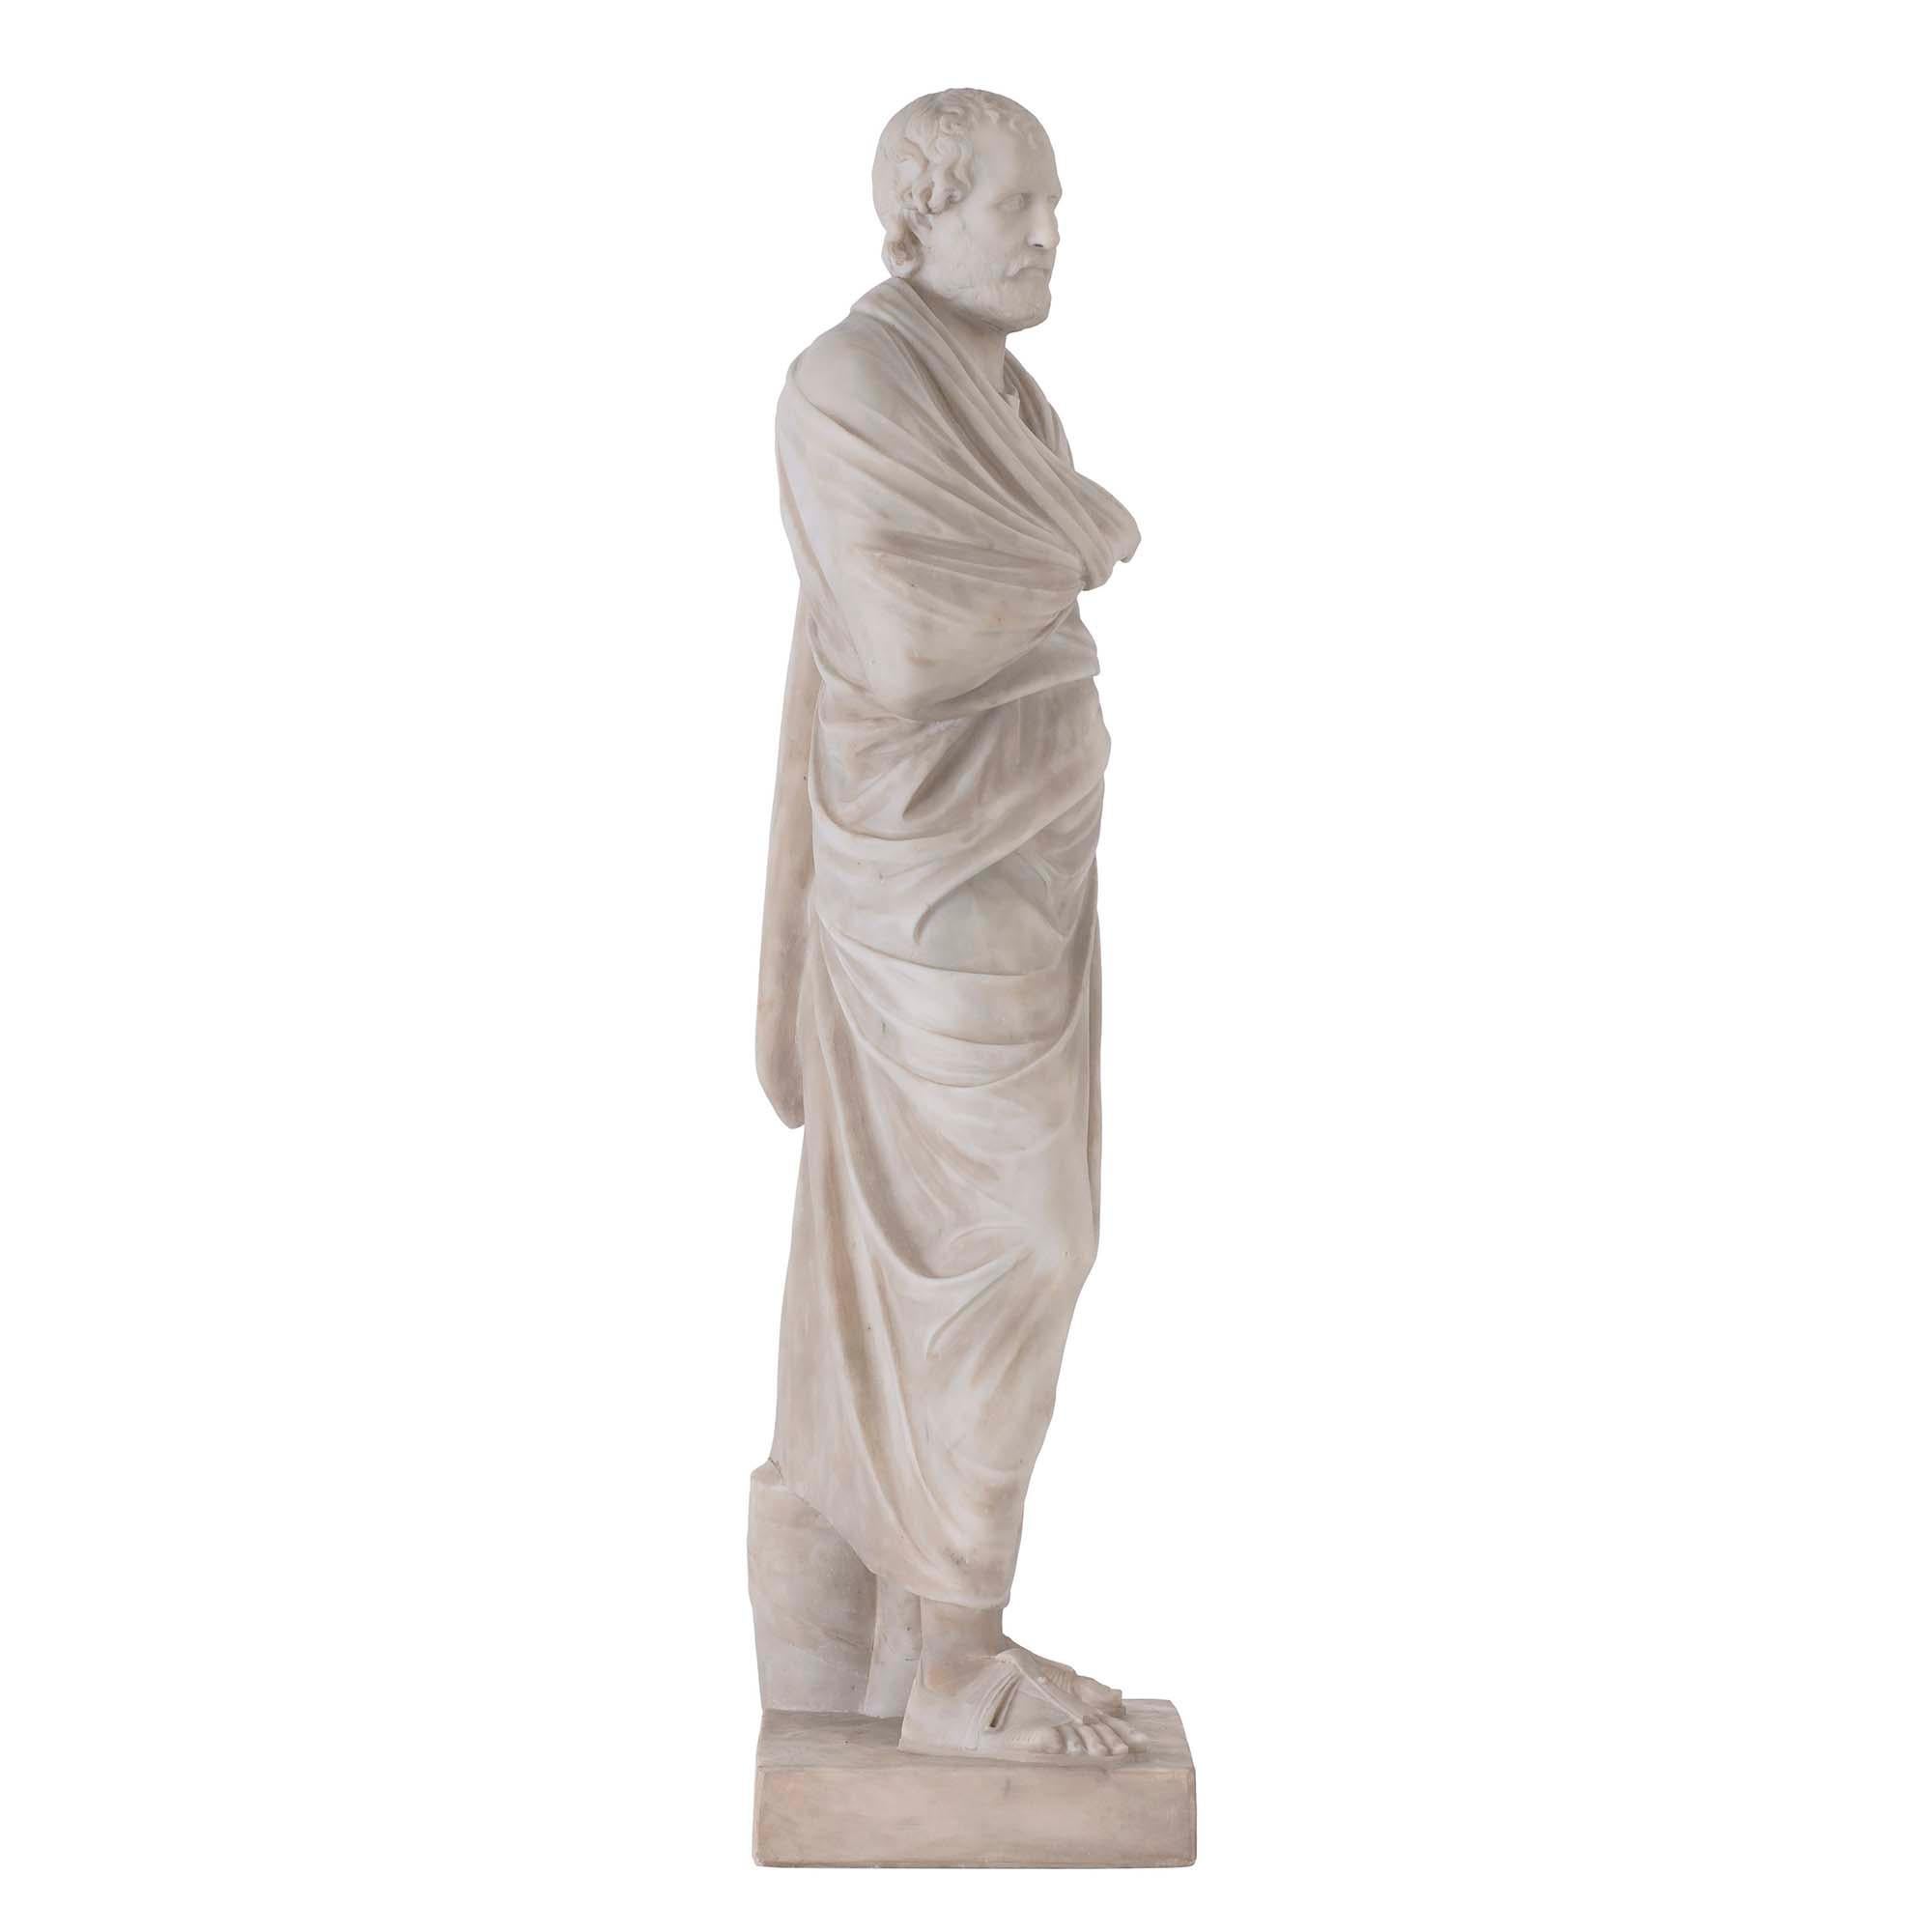 A handsome Italian early 19th century white Carrara marble statue of Aeschines. The sculpture is raised on a rectangular base with the philosopher in classic draped attire and footwear. Extremely well executed and fine details and